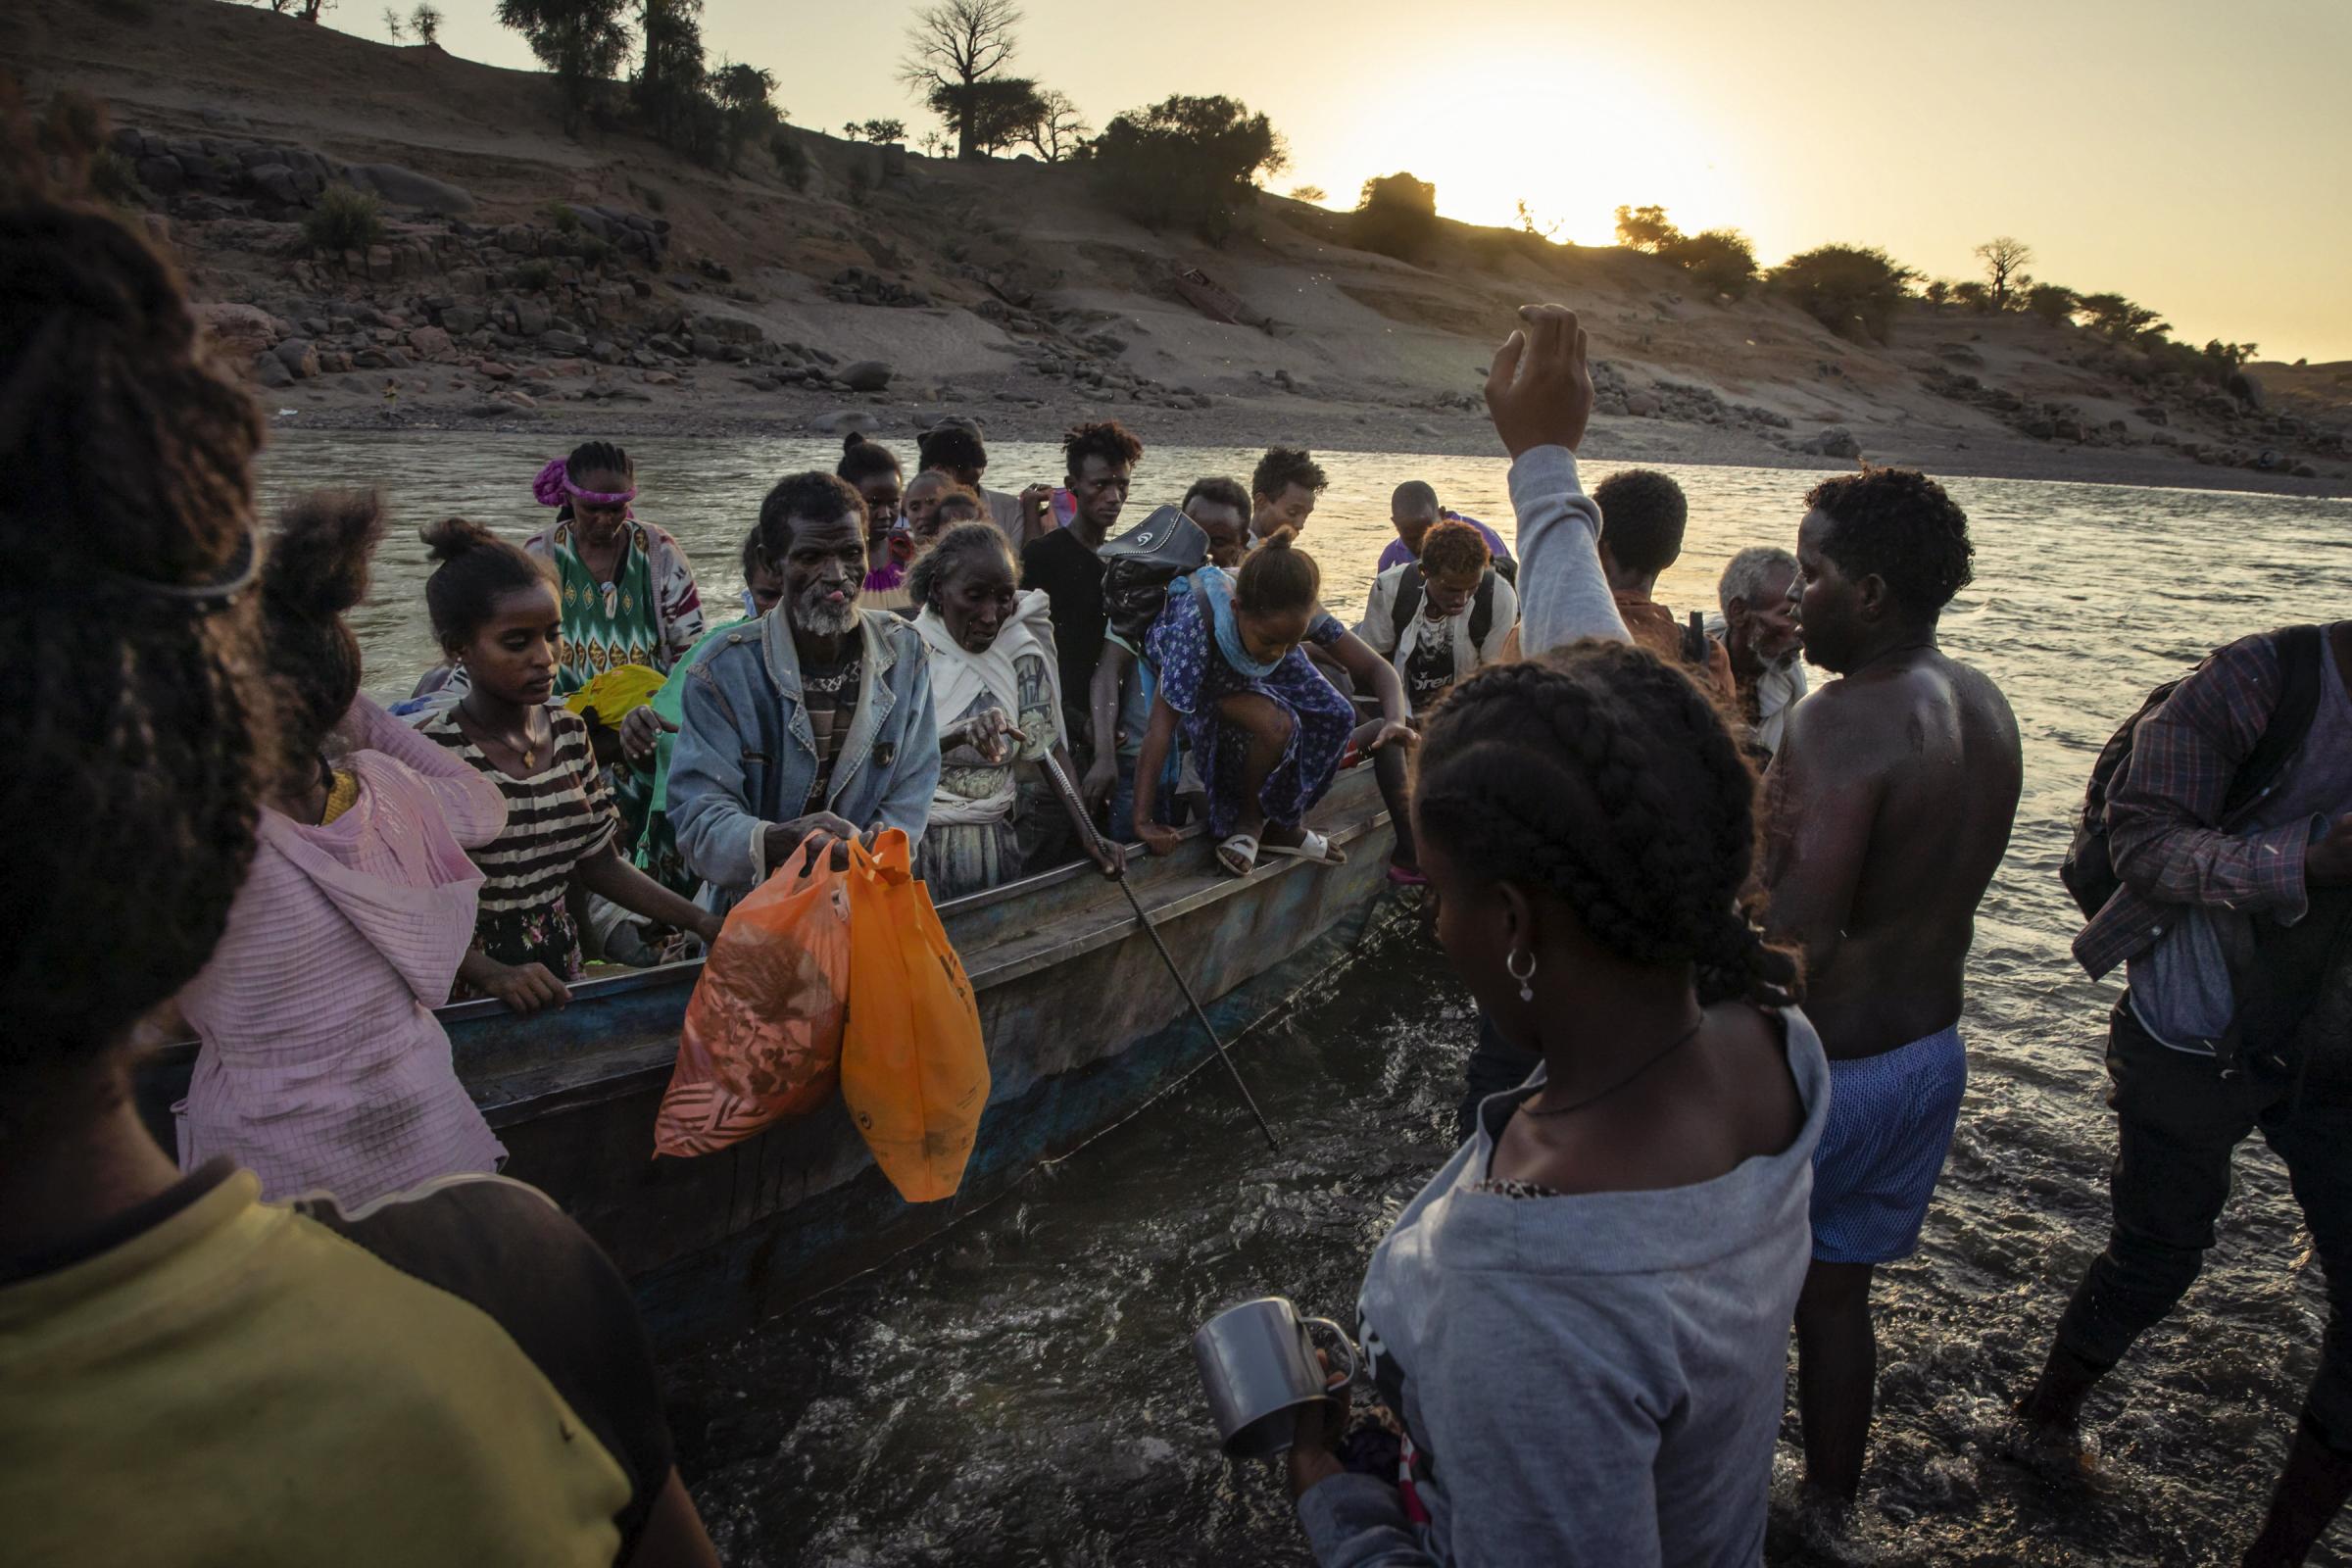 Tigrayan refugees arrive on the banks of the Tekeze River.